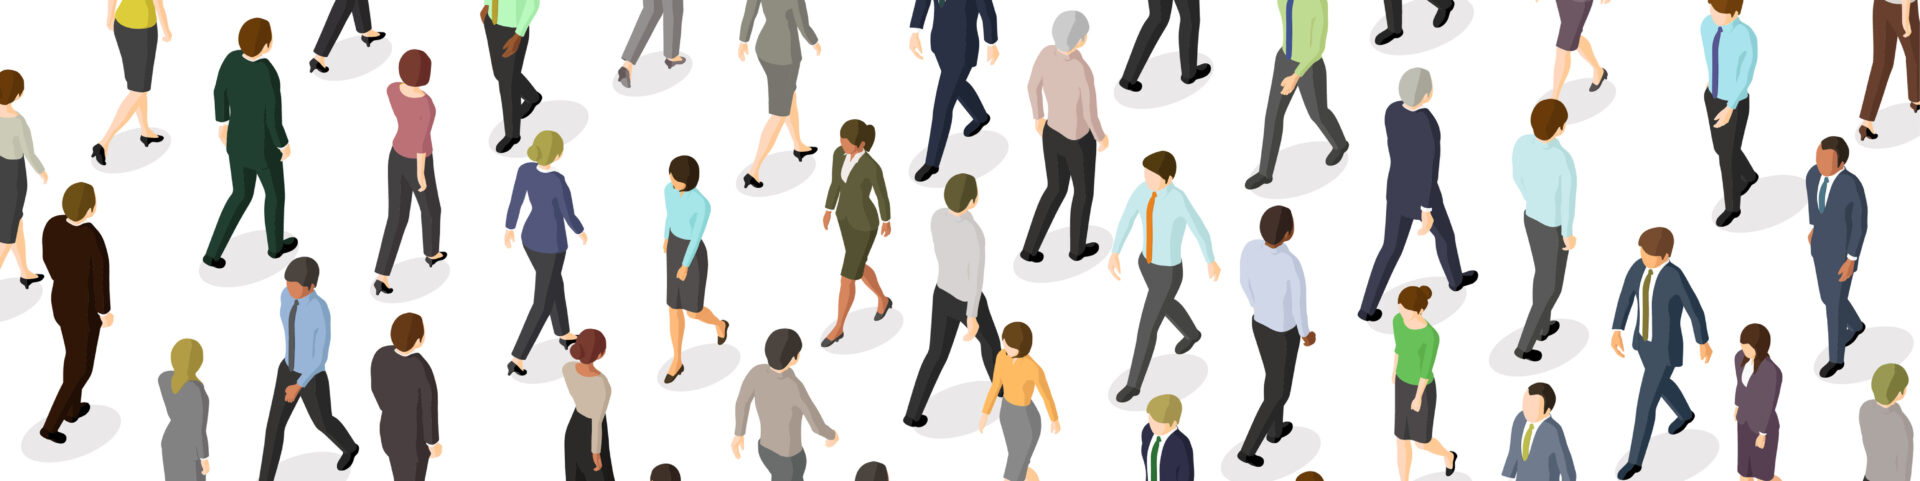 Crowd of illustrated people walking